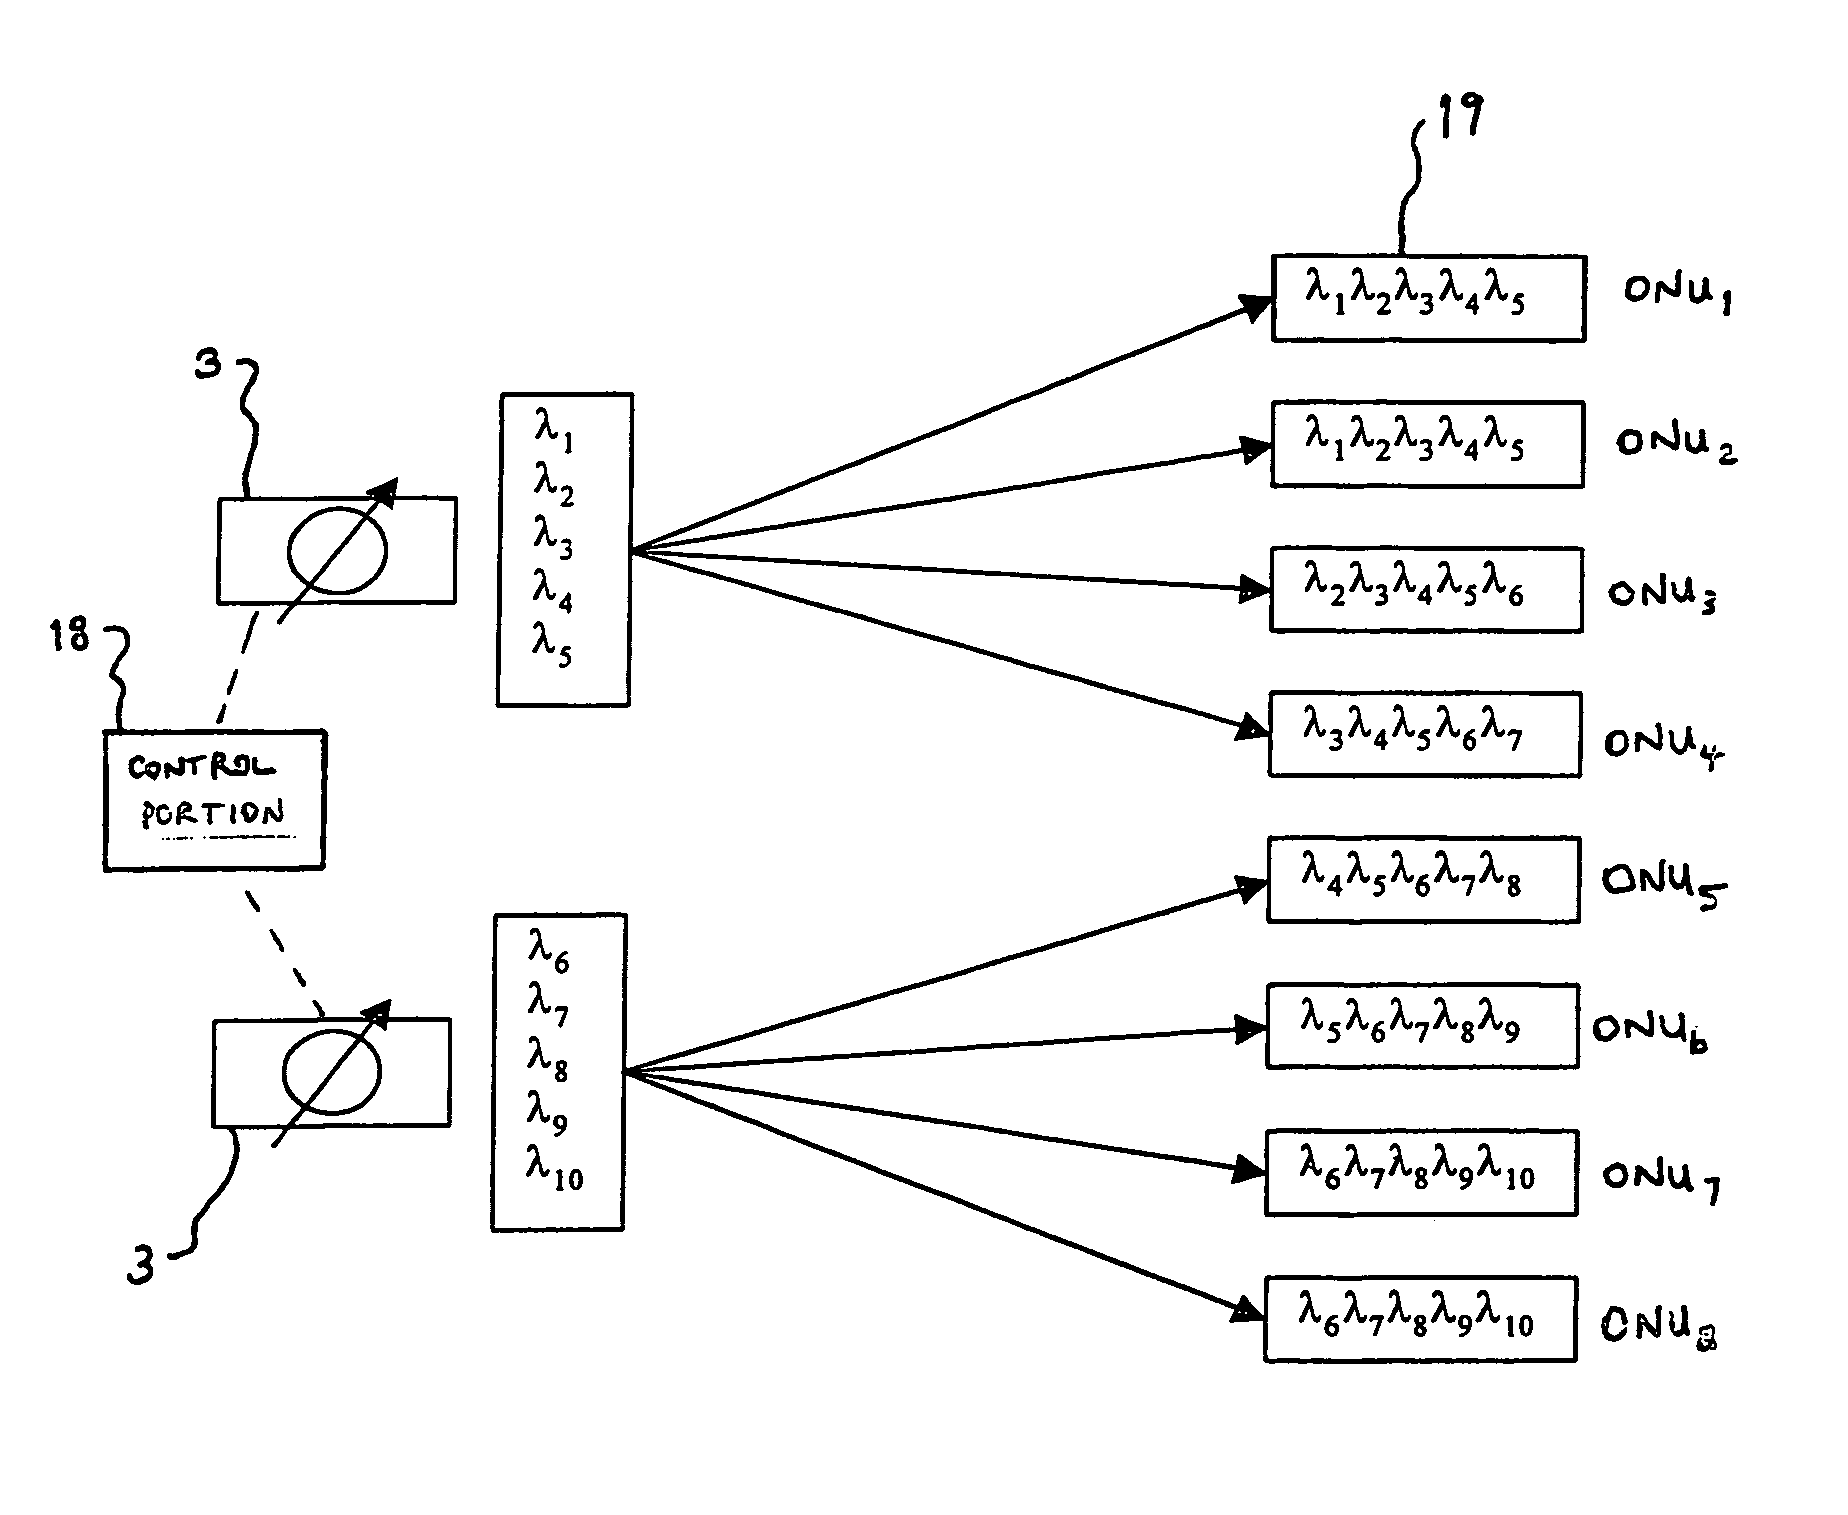 Optical network units preconfigured to accept predetermined subsets of wavelengths